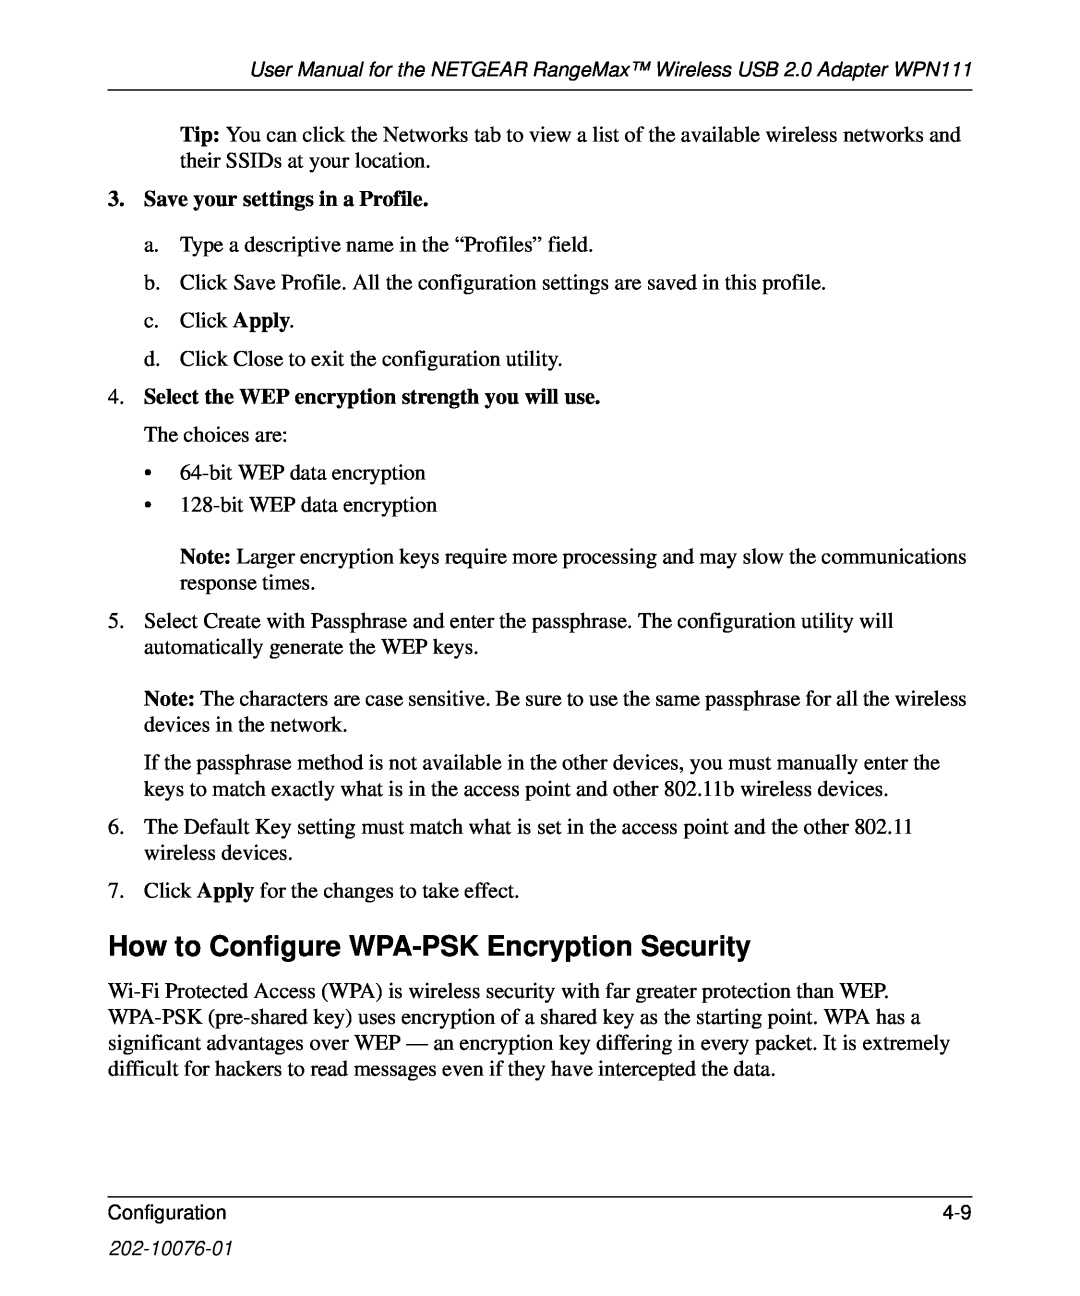 NETGEAR WPN111 user manual How to Configure WPA-PSK Encryption Security, Save your settings in a Profile 